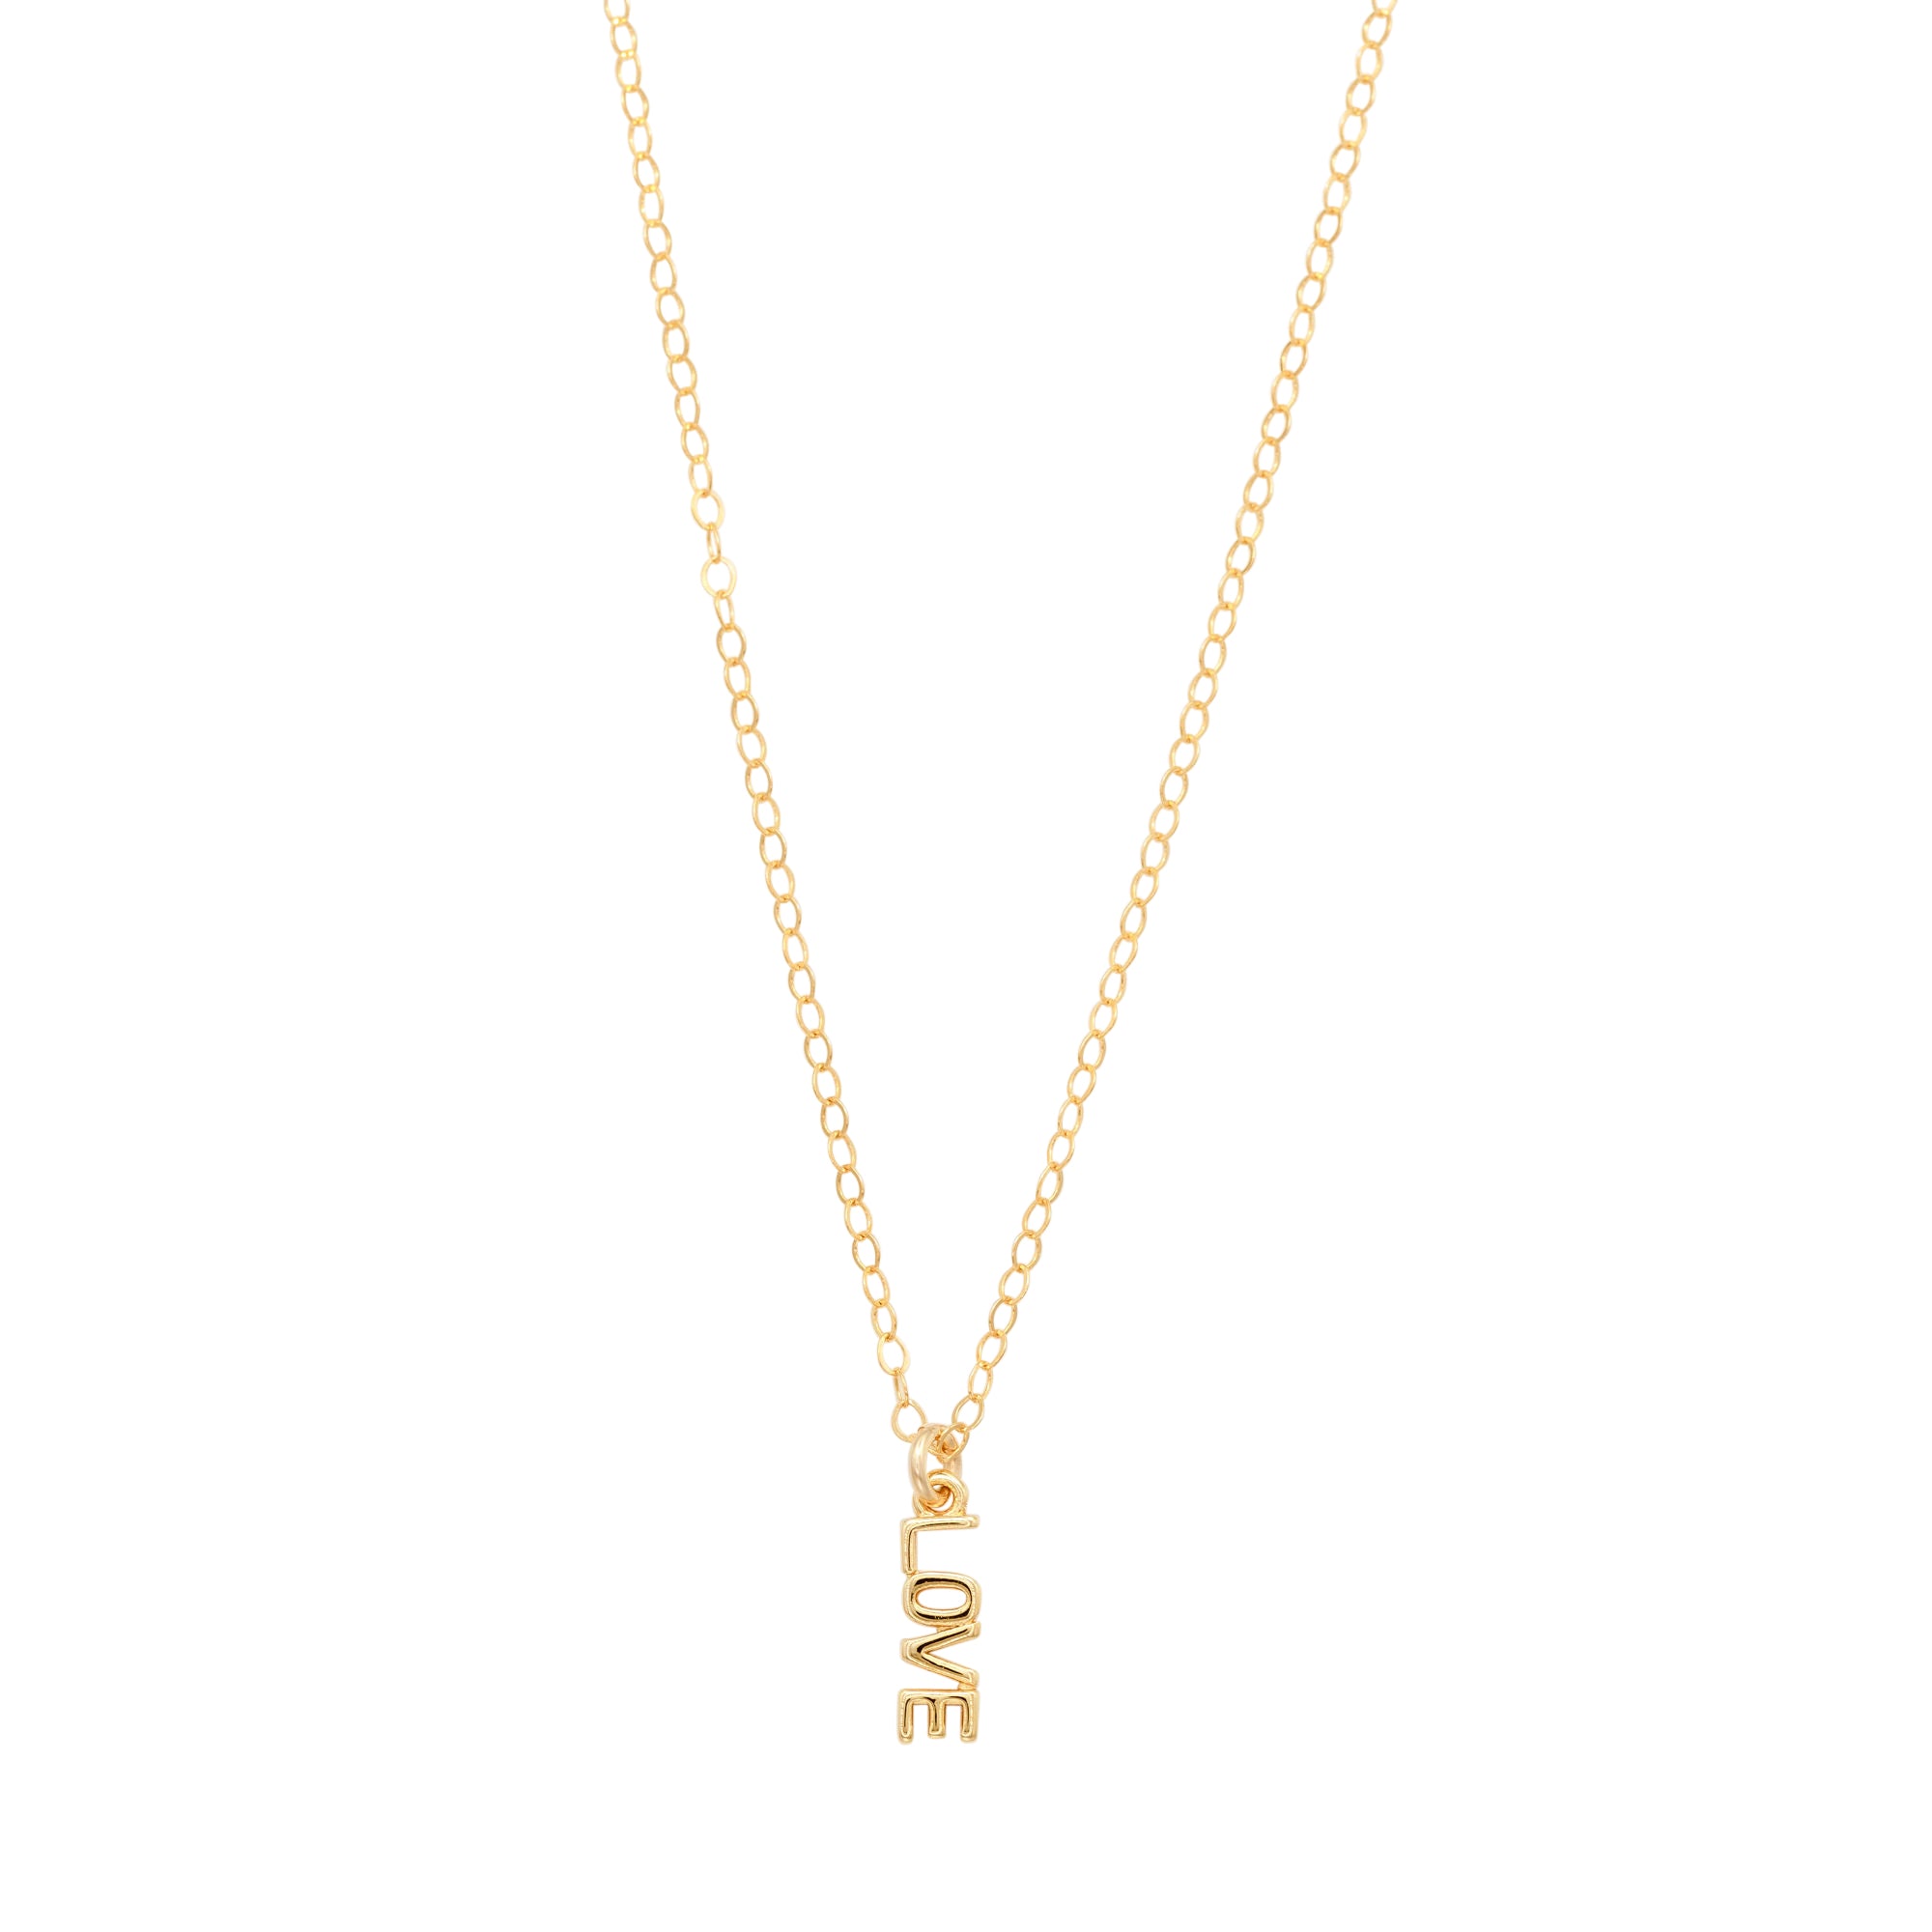 Love Necklace by Erin Fader Jewelry